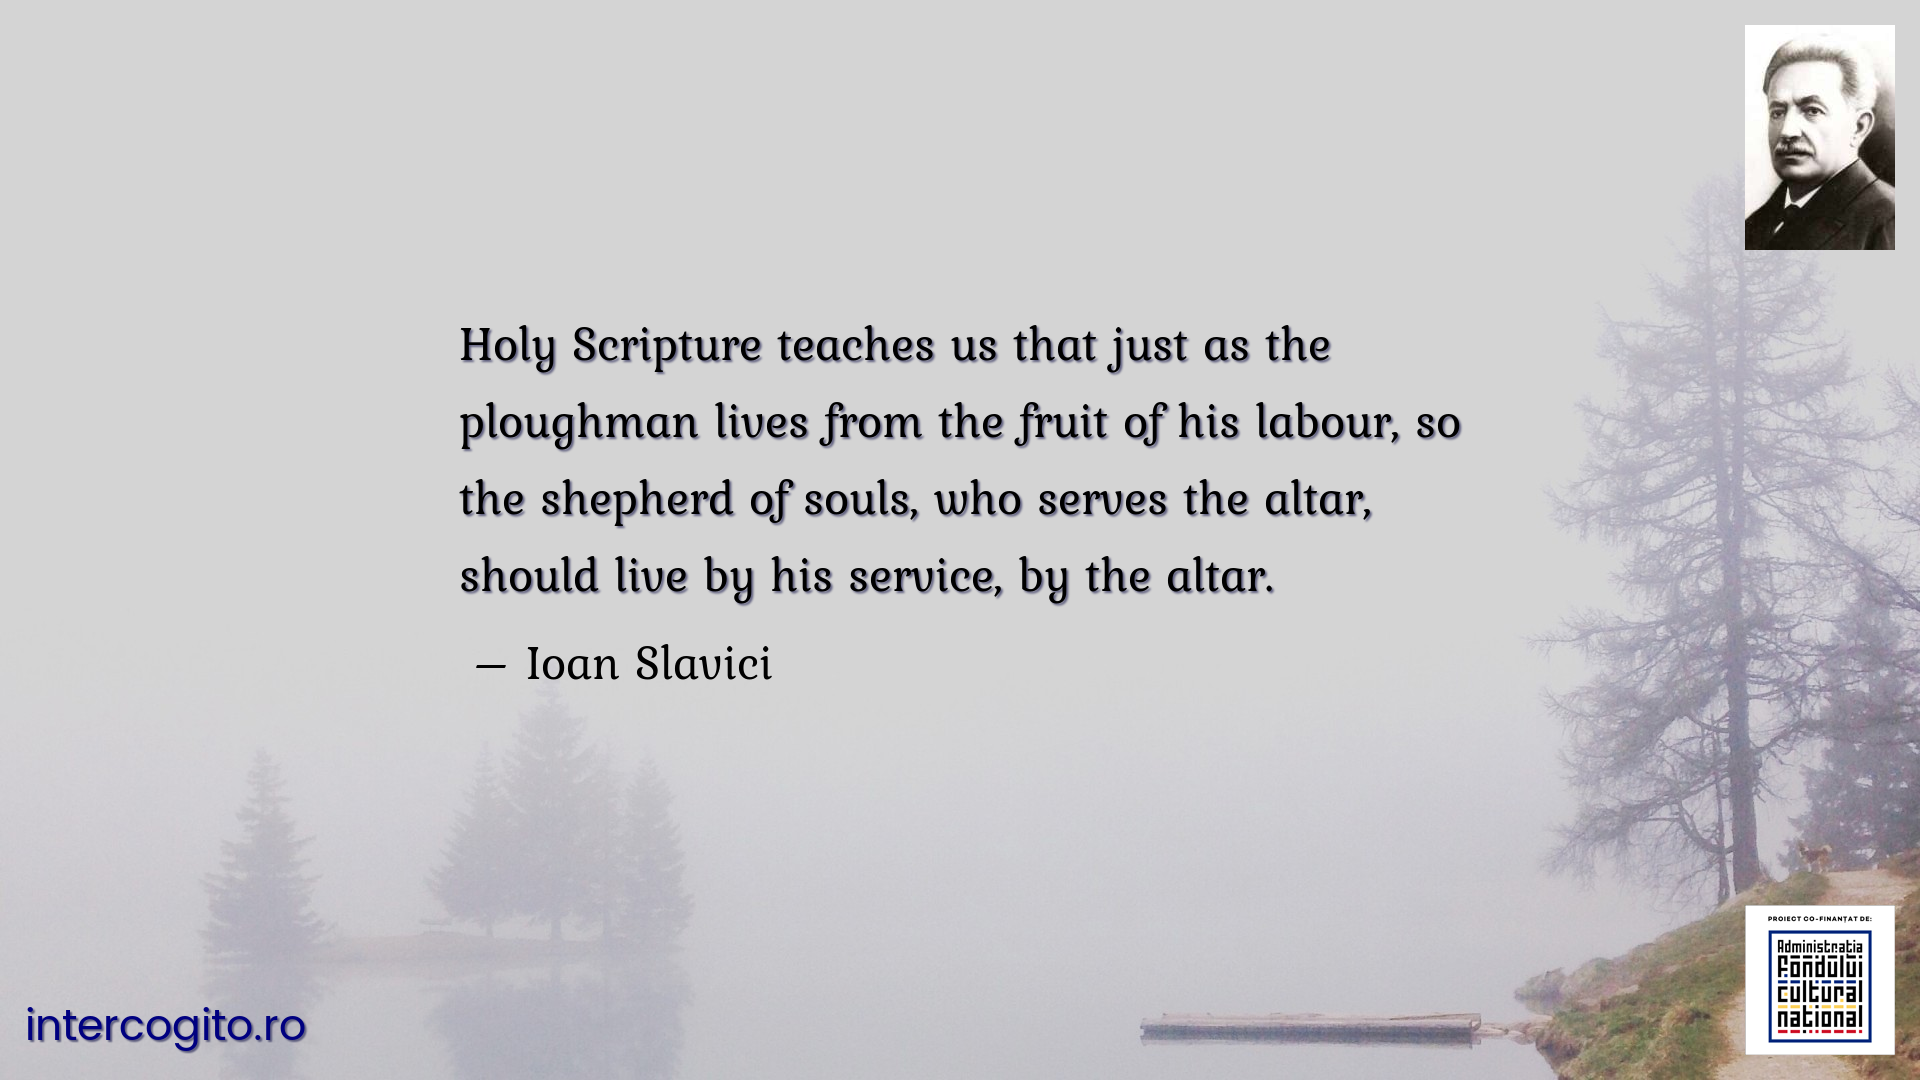 Holy Scripture teaches us that just as the ploughman lives from the fruit of his labour, so the shepherd of souls, who serves the altar, should live by his service, by the altar.